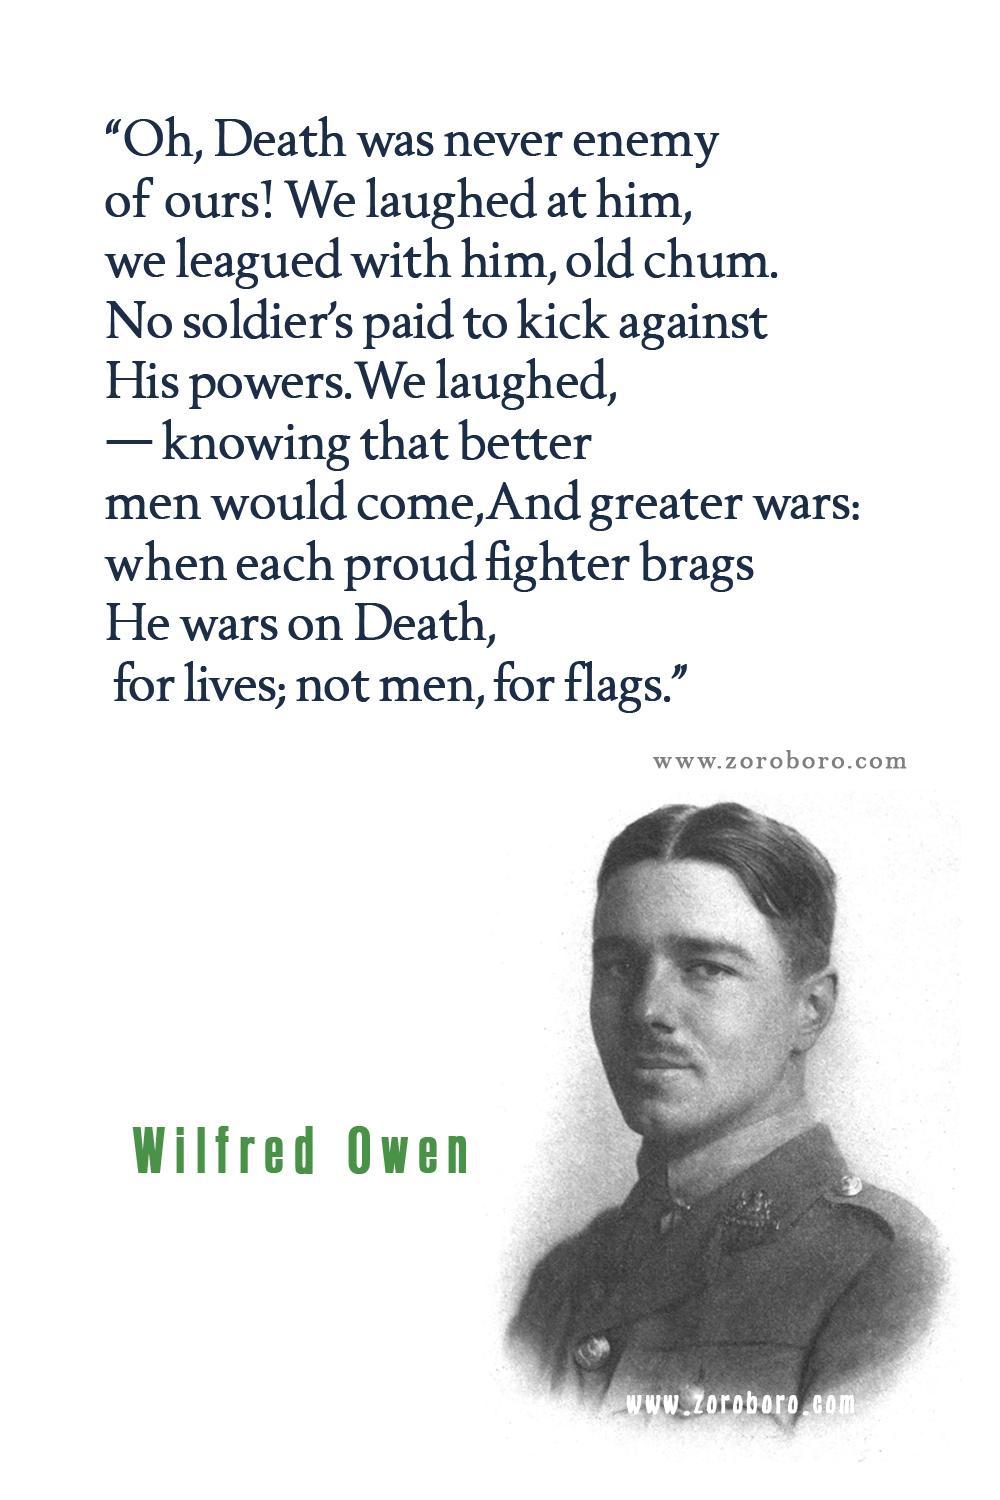 Wilfred Owen Quotes, Wilfred Owen Poet, Wilfred Owen Poetry, Wilfred Owen Poems, Wilfred Owen Books Quotes, Wilfred Owen.